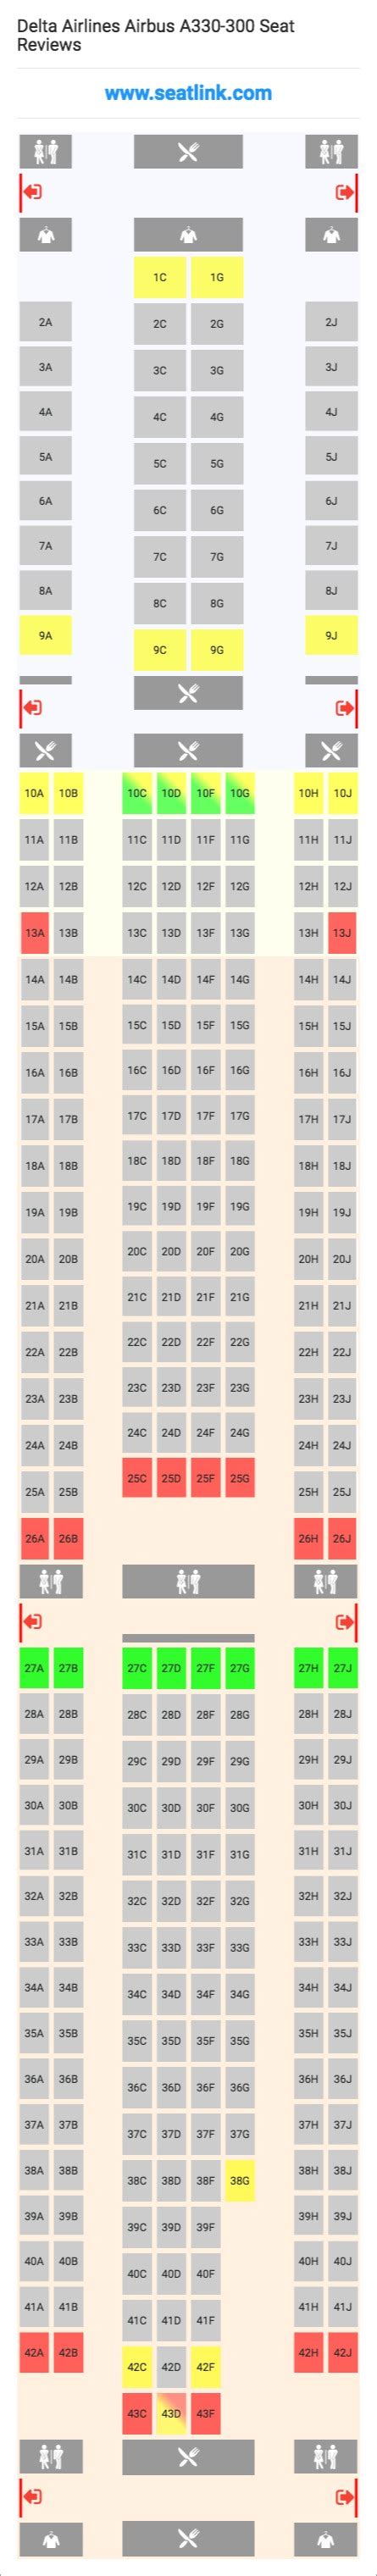 Images Of Delta Airlines Seating Chart